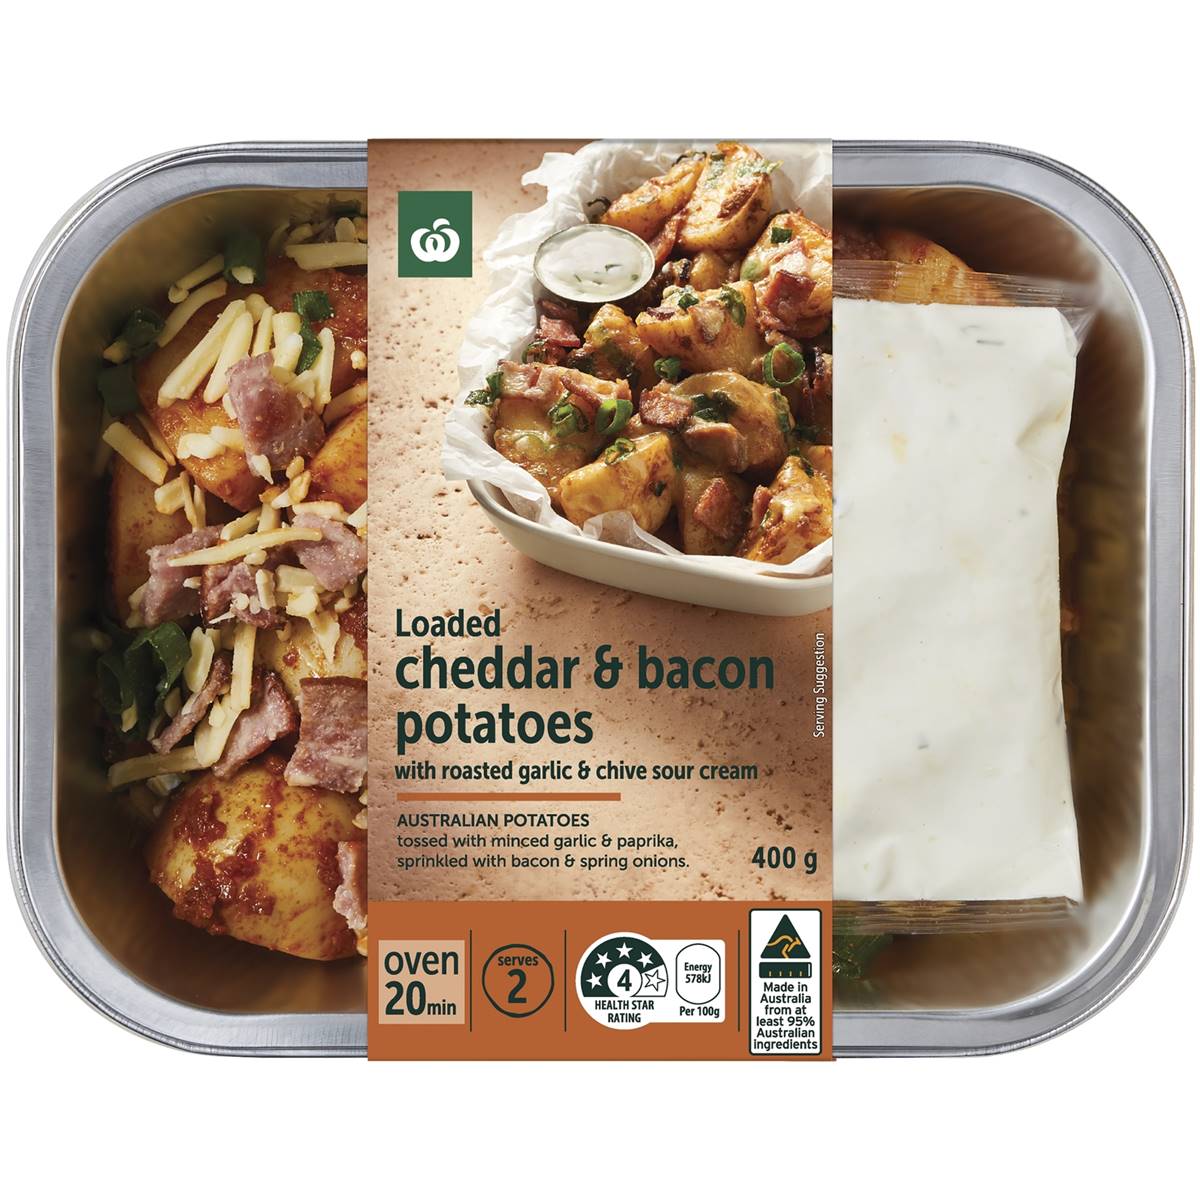 Calories in Woolworths Loaded Cheddar & Bacon Potatoes